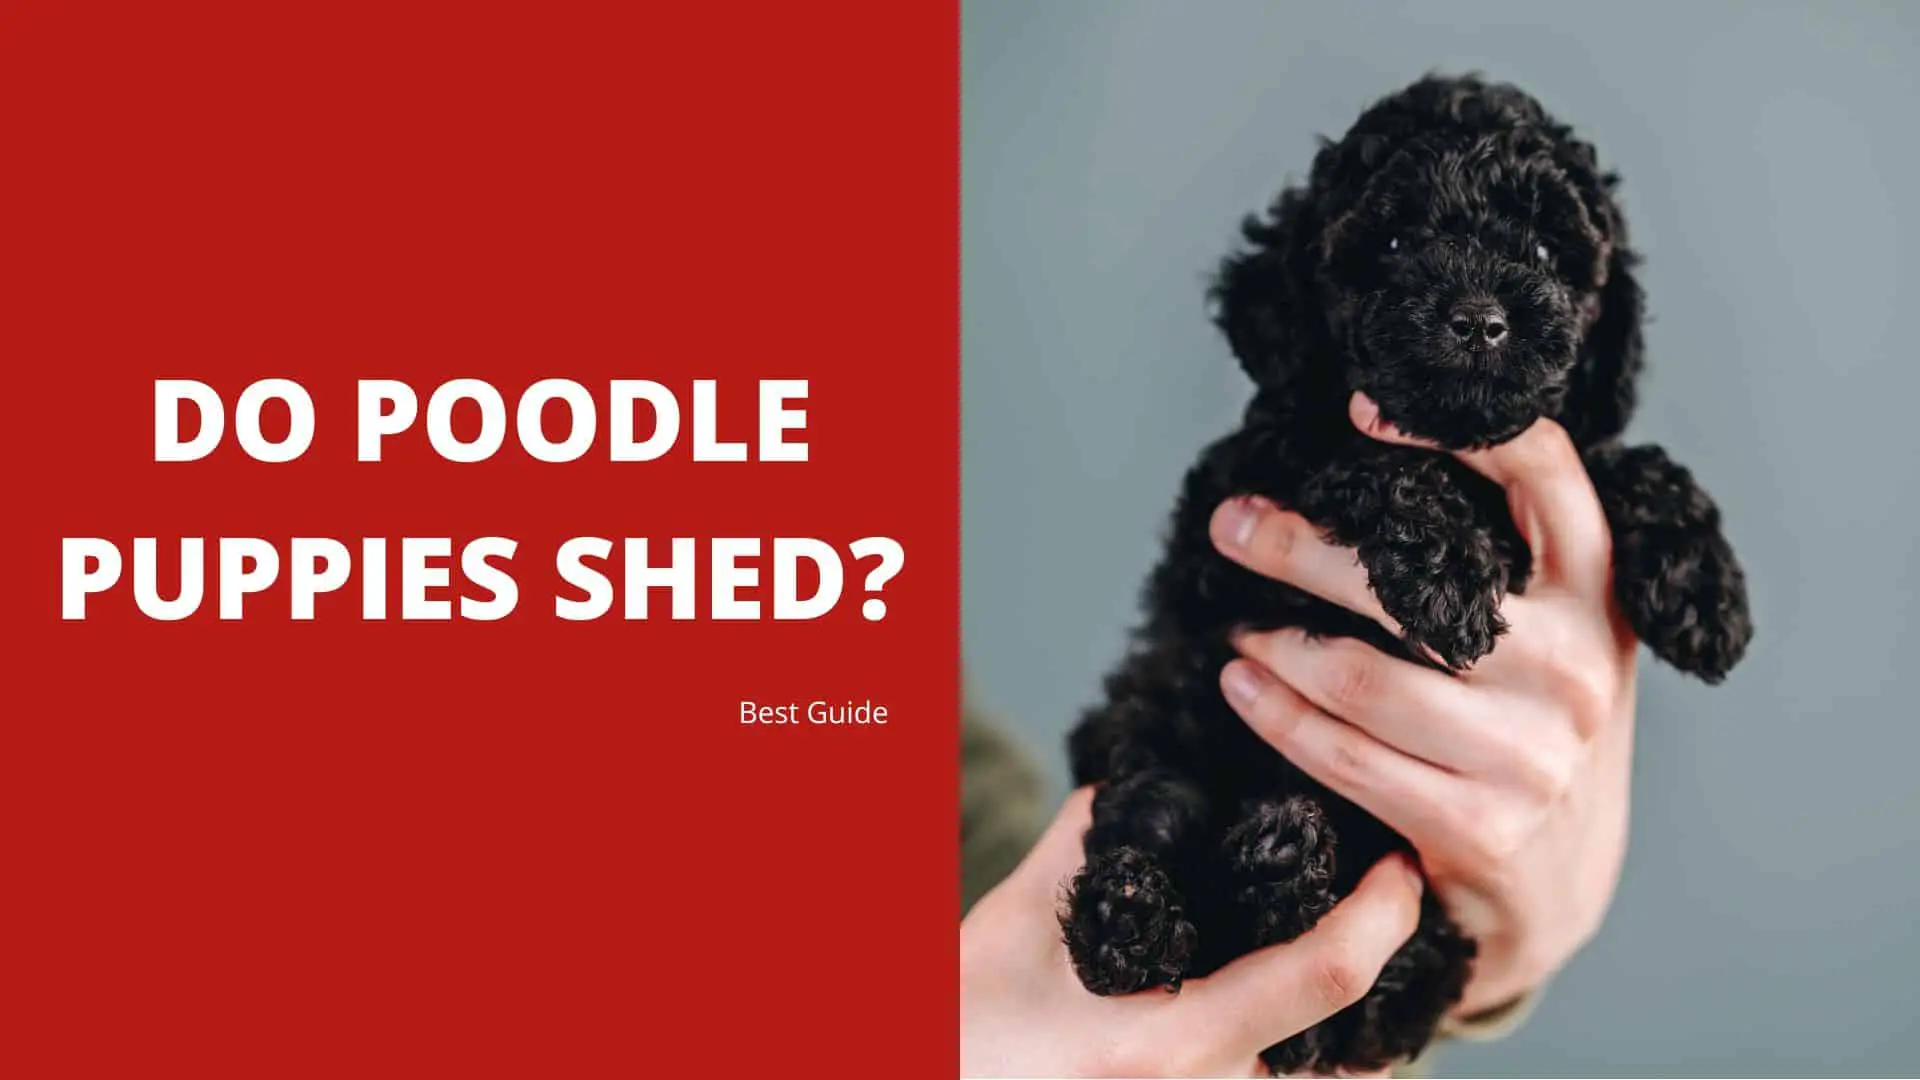 Do Poodle Puppies Shed? Best Guide 2022